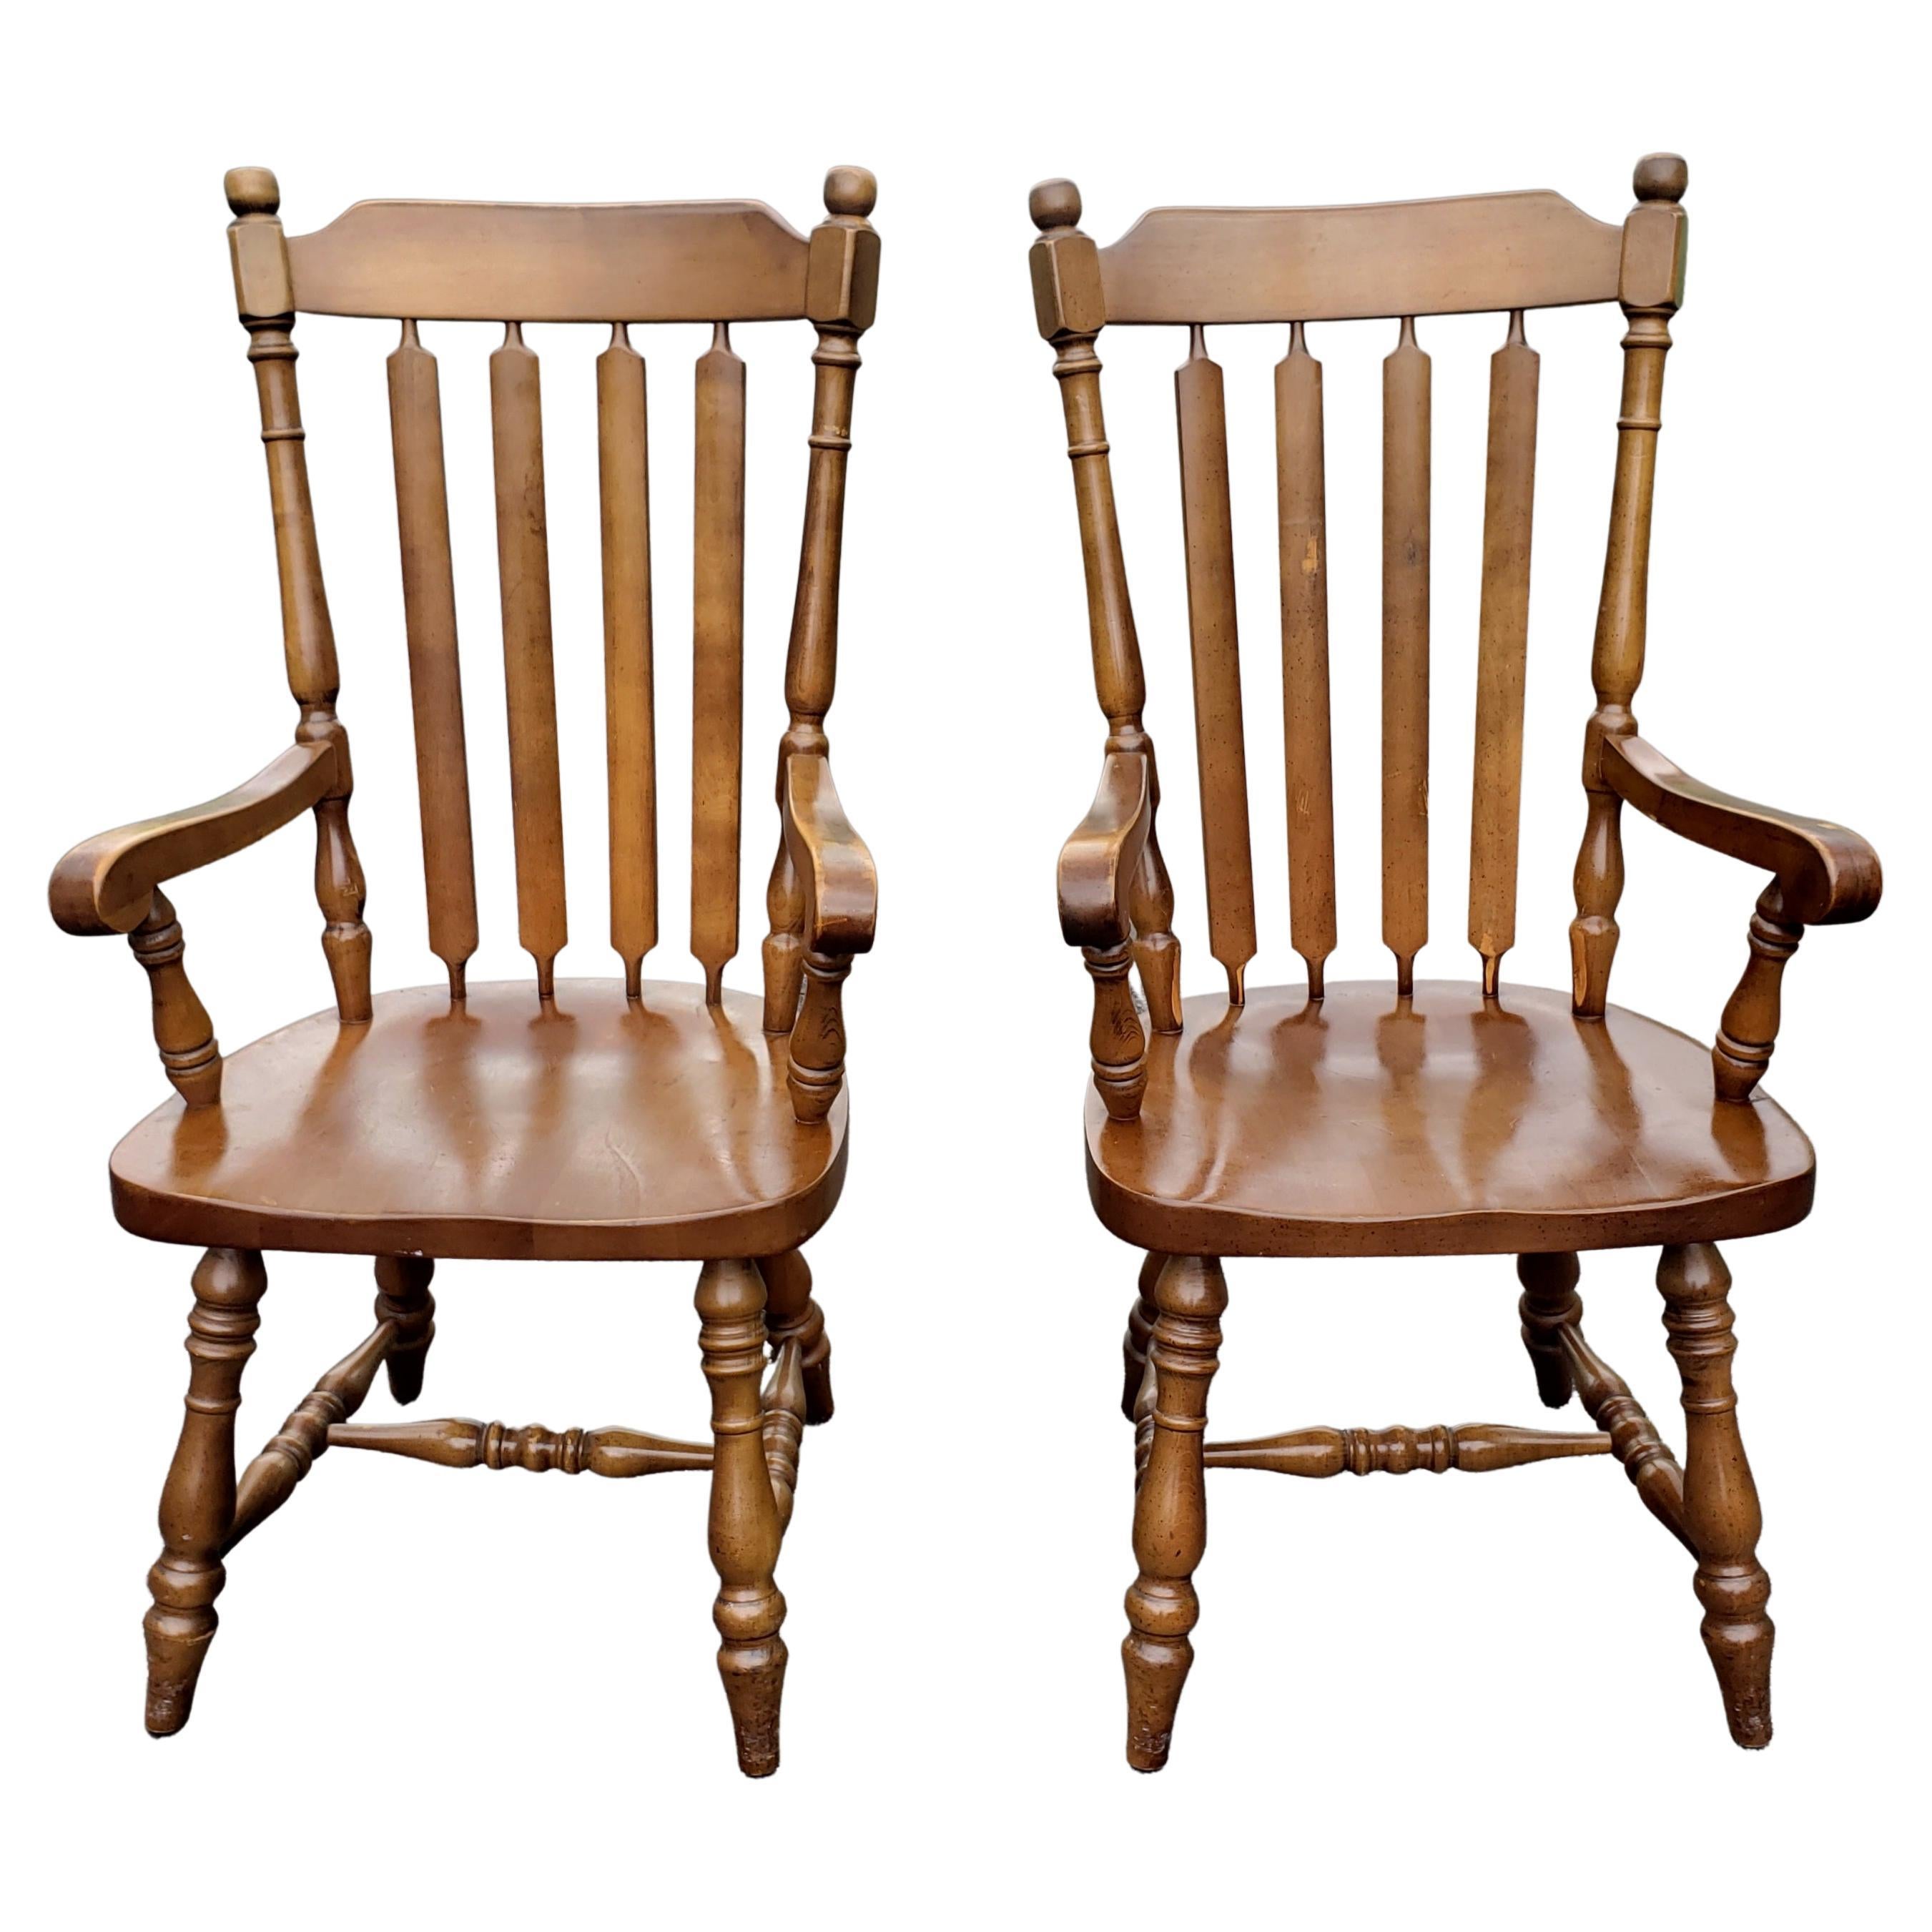 J.D.V. High Back Heavy Duty Solid Maple Country Dining Chairs, C 1970s - a Set In Good Condition For Sale In Germantown, MD